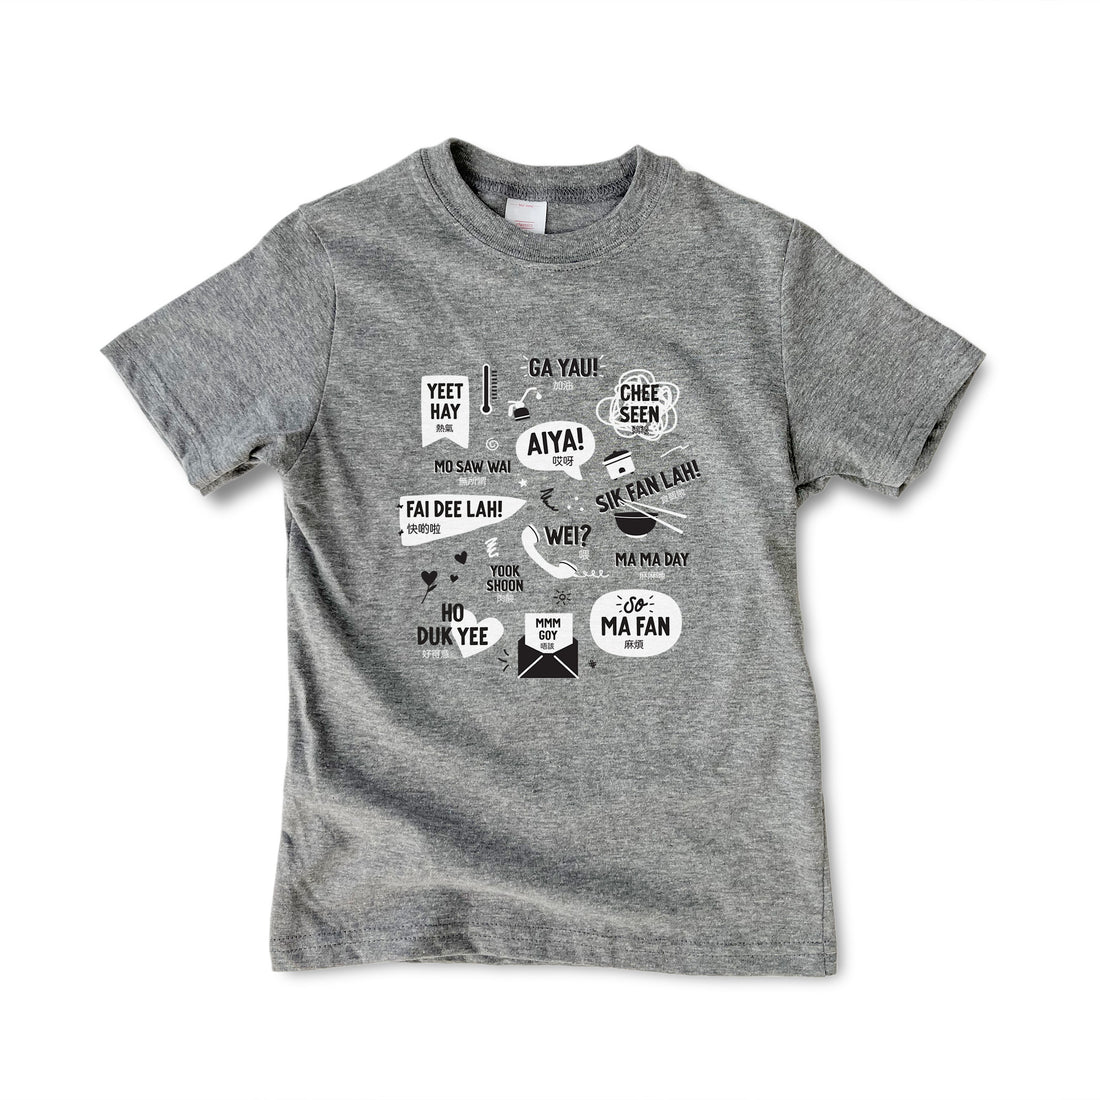 Kids Cantonese sayings t-shirt in grey by I&